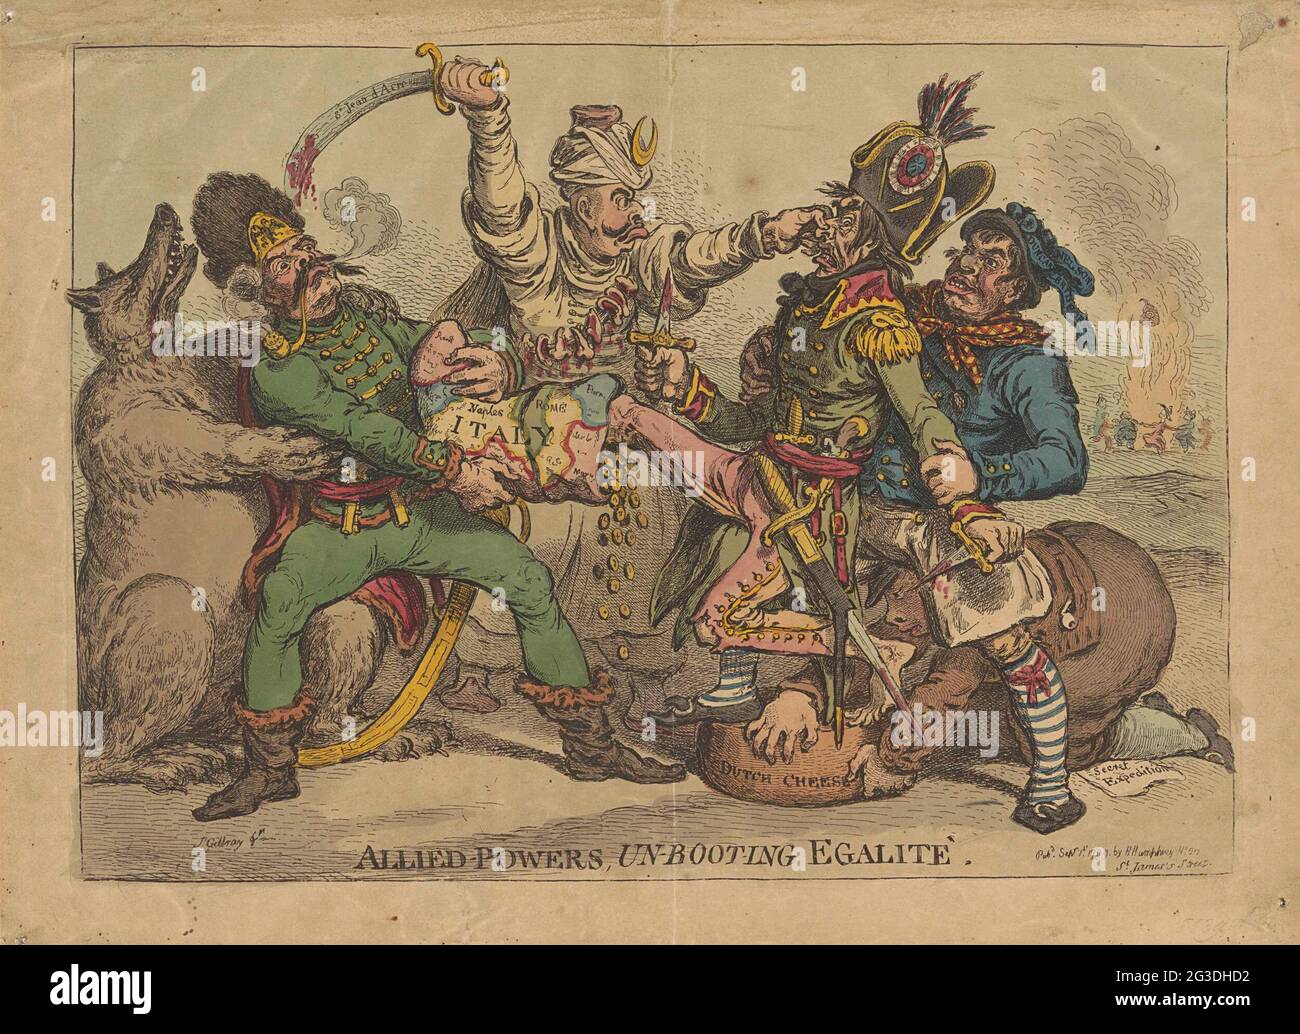 Cartoon on Napoleons defeats in 1799; Allied-Powers, un-boot-ing egalité. A  caricature from Napoleon Bonaparte is attacked by the four Allied Parties  (Austria, Ottoman Empire, Great Britain and the Netherlands). Napoleon is  held